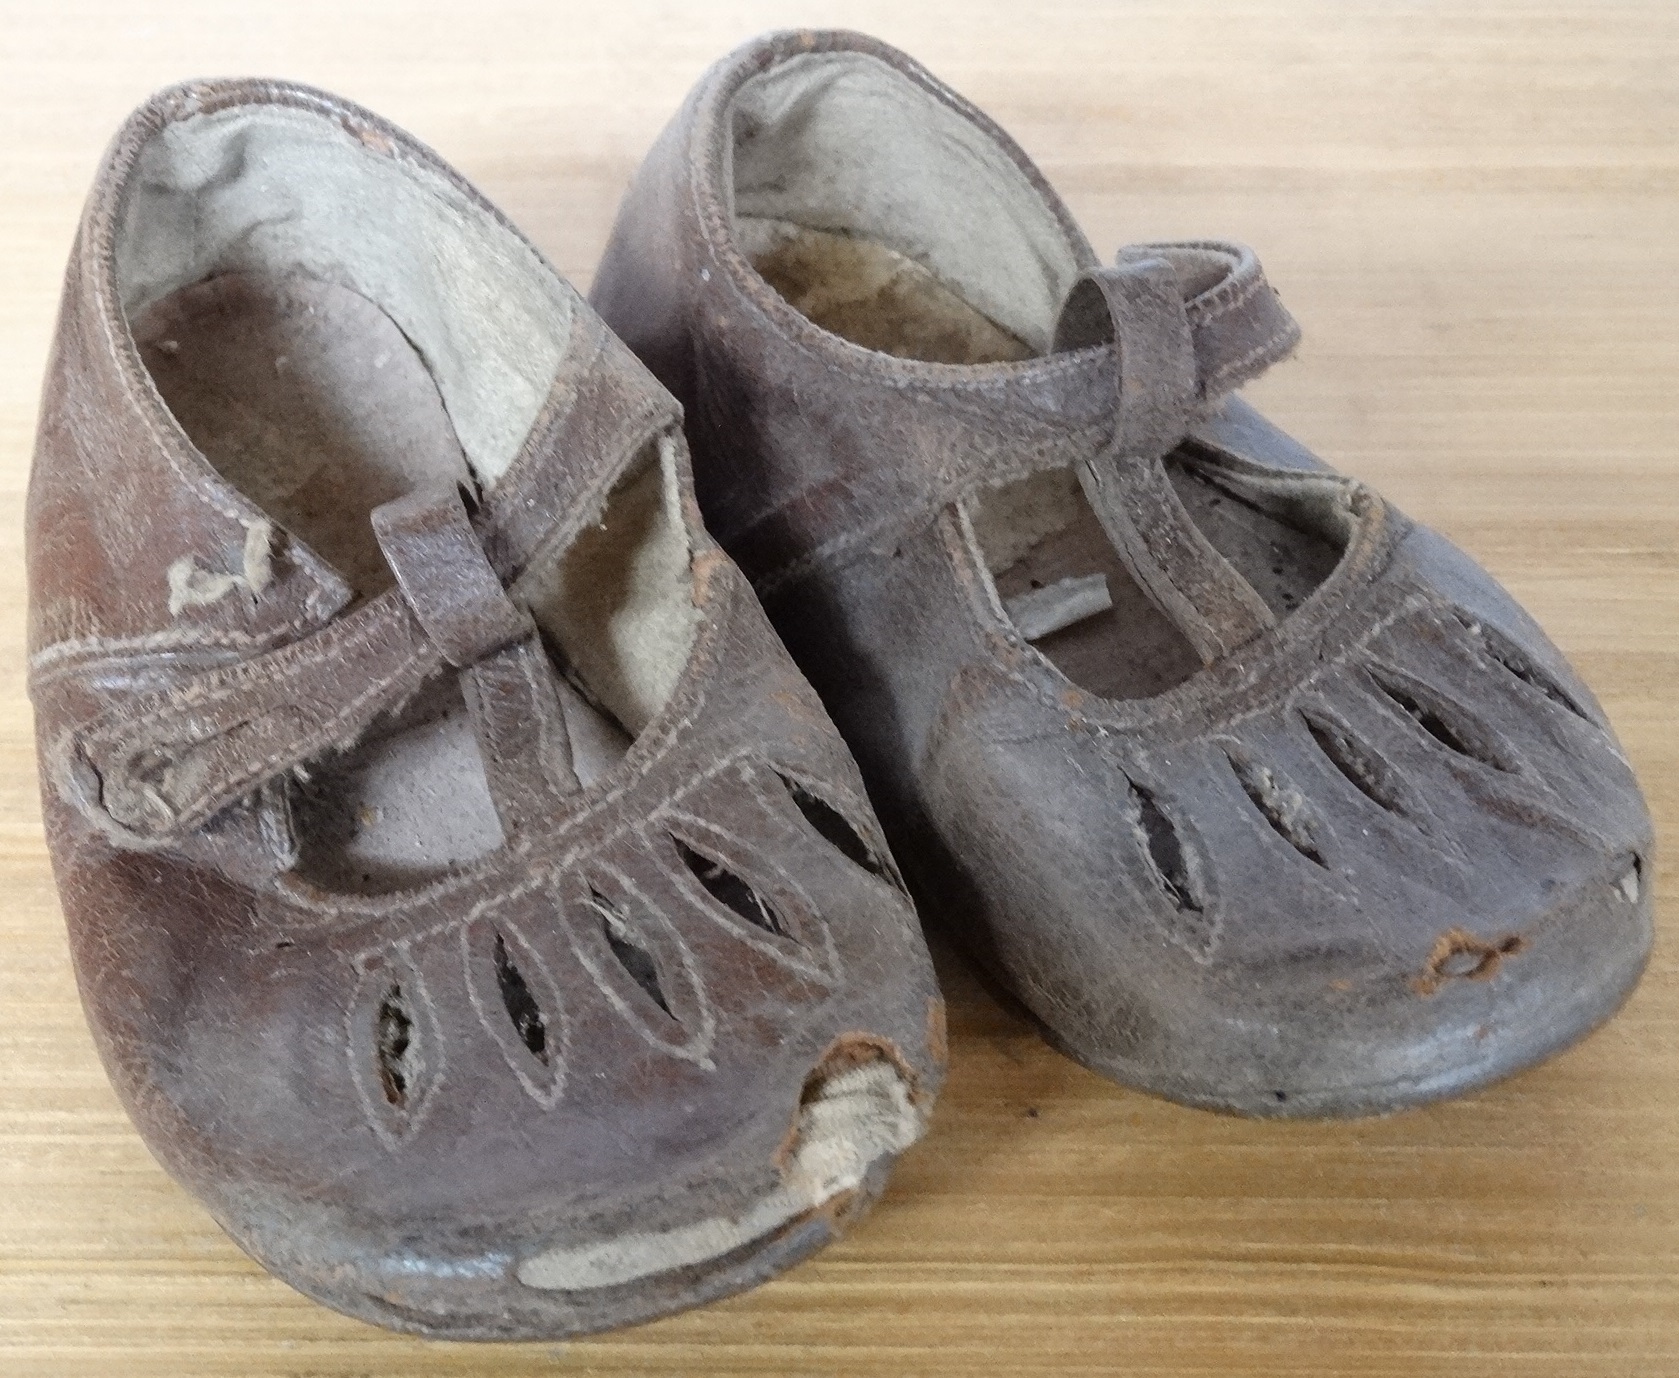 Pair of Toddlers leather shoes